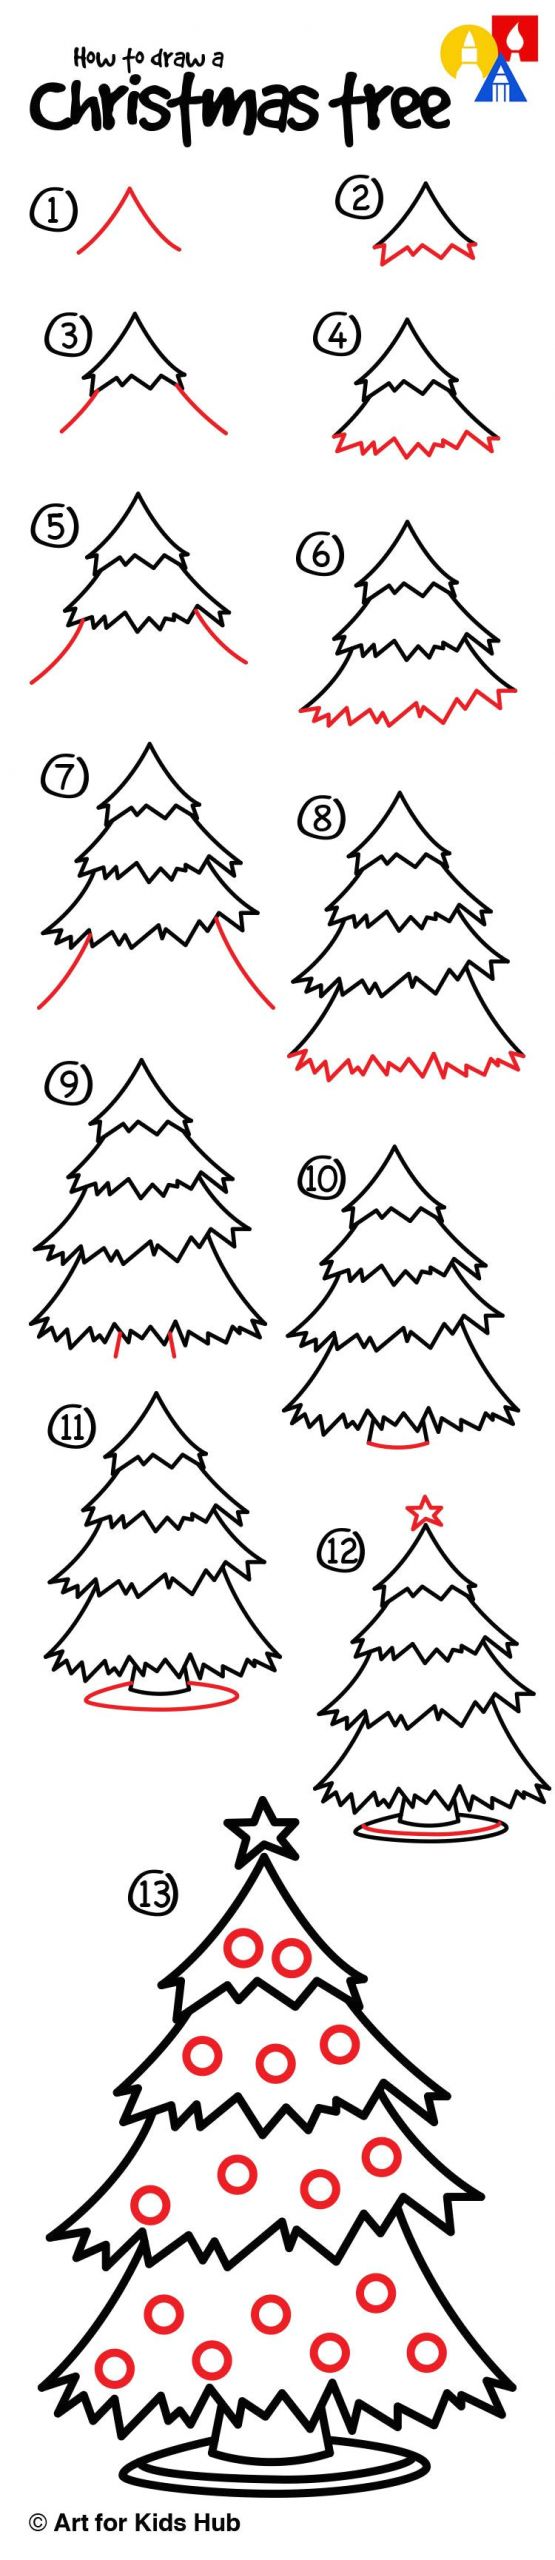 Draw A Christmas Tree Easy How to Draw A Christmas Tree Art for Kids Hub Zeichnen